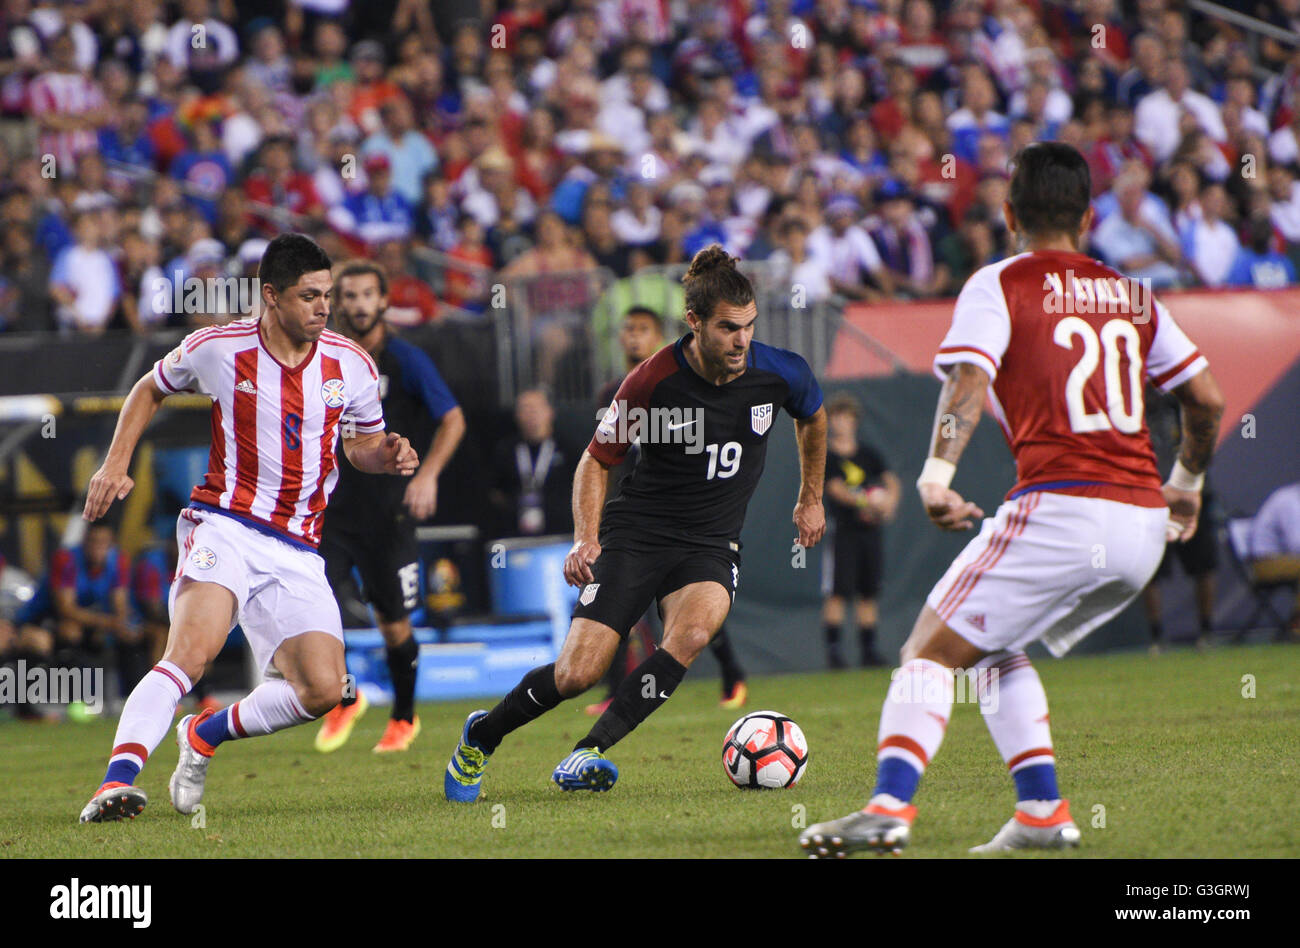 Philadelphia, Pennsylvania, USA. 11th June, 2016. GRAHAM ZUSI of the USA in action against Paraguay's VICTOR AYALA, during the Copa America match played at Lincoln Financial Field in Philadelphia Pa © Ricky Fitchett/ZUMA Wire/Alamy Live News Stock Photo